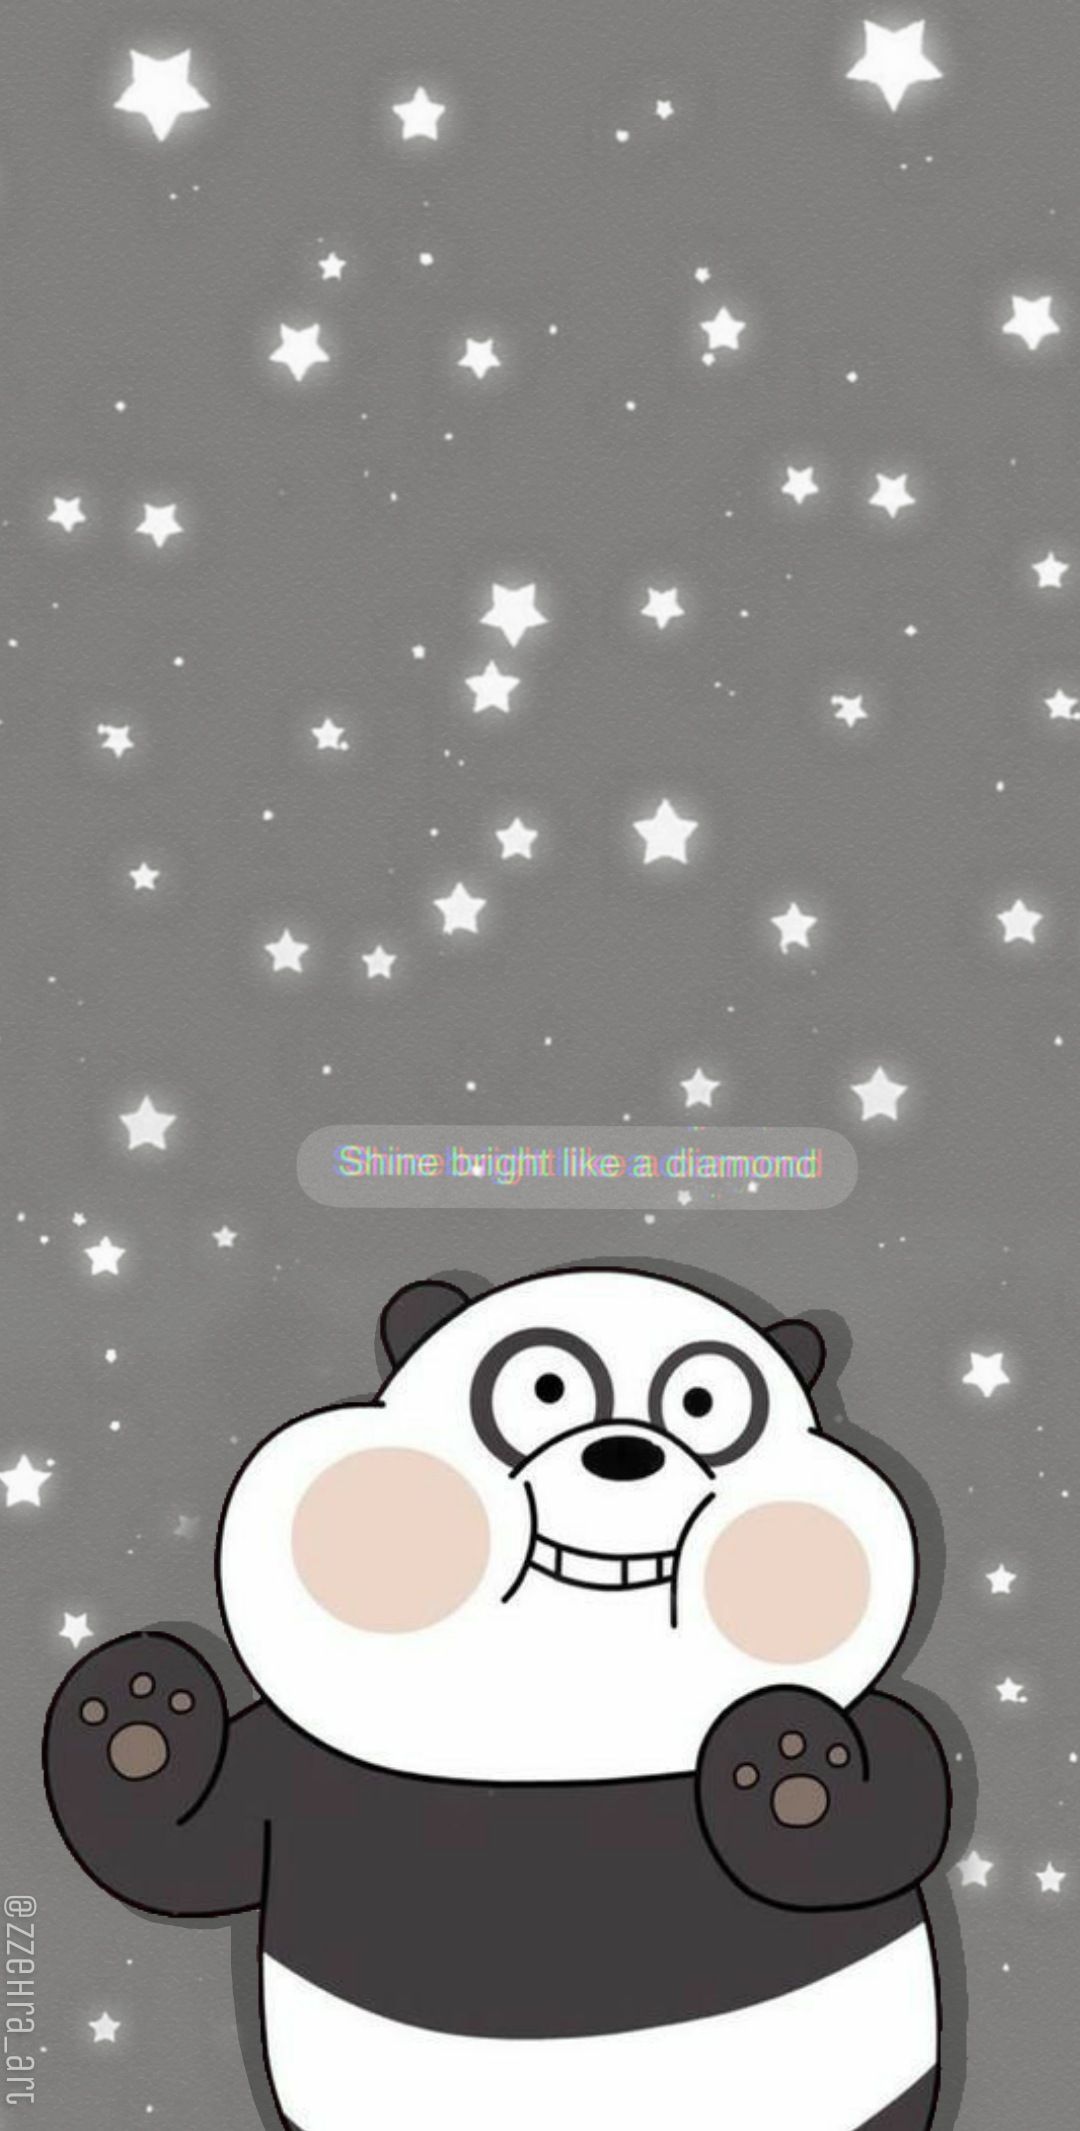 A panda bear with stars in the background - We Bare Bears